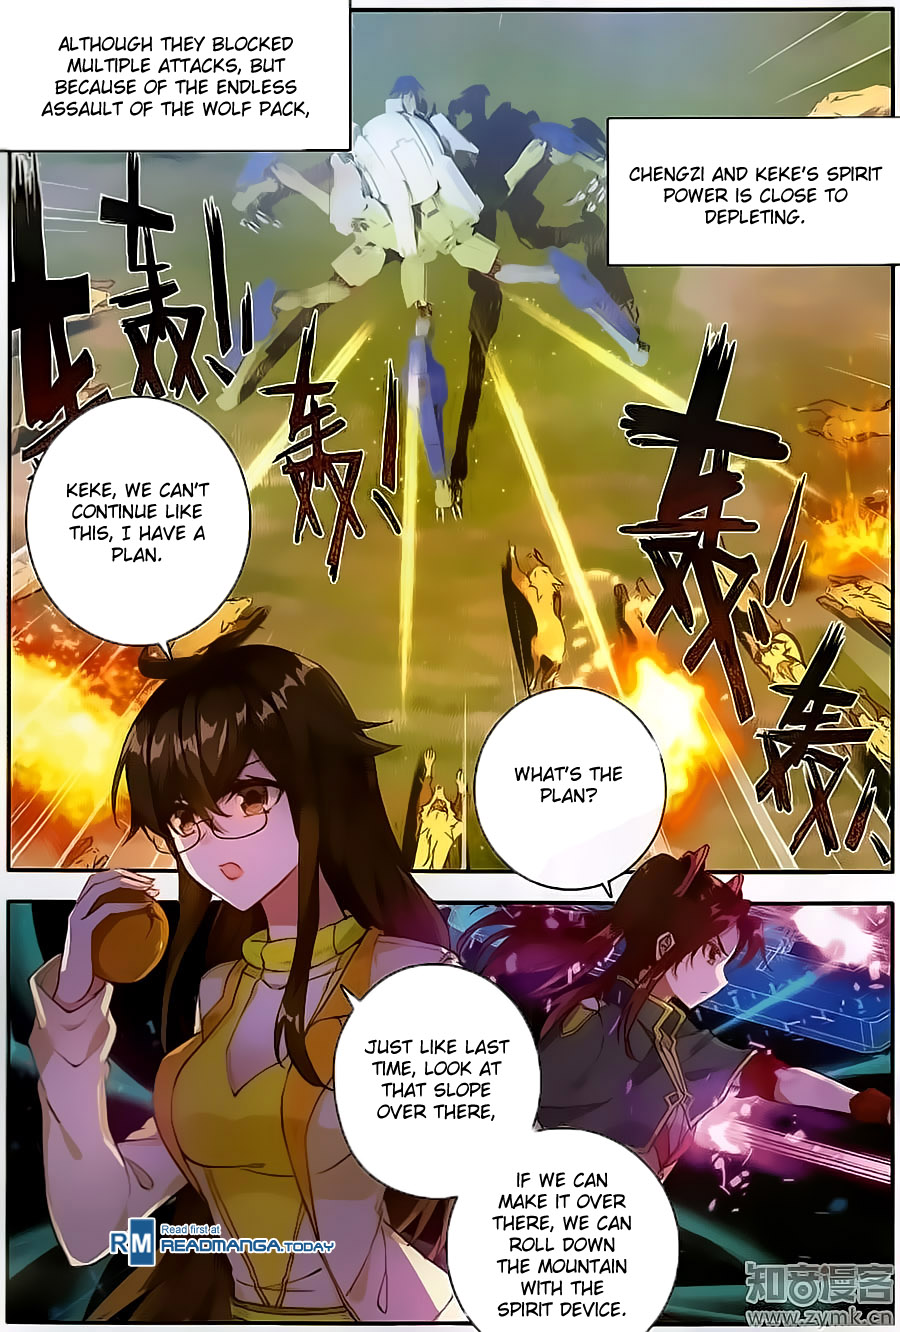 Soul Land II The Peerless Tang Sect Ch. 127 Fourth Spirit Ring